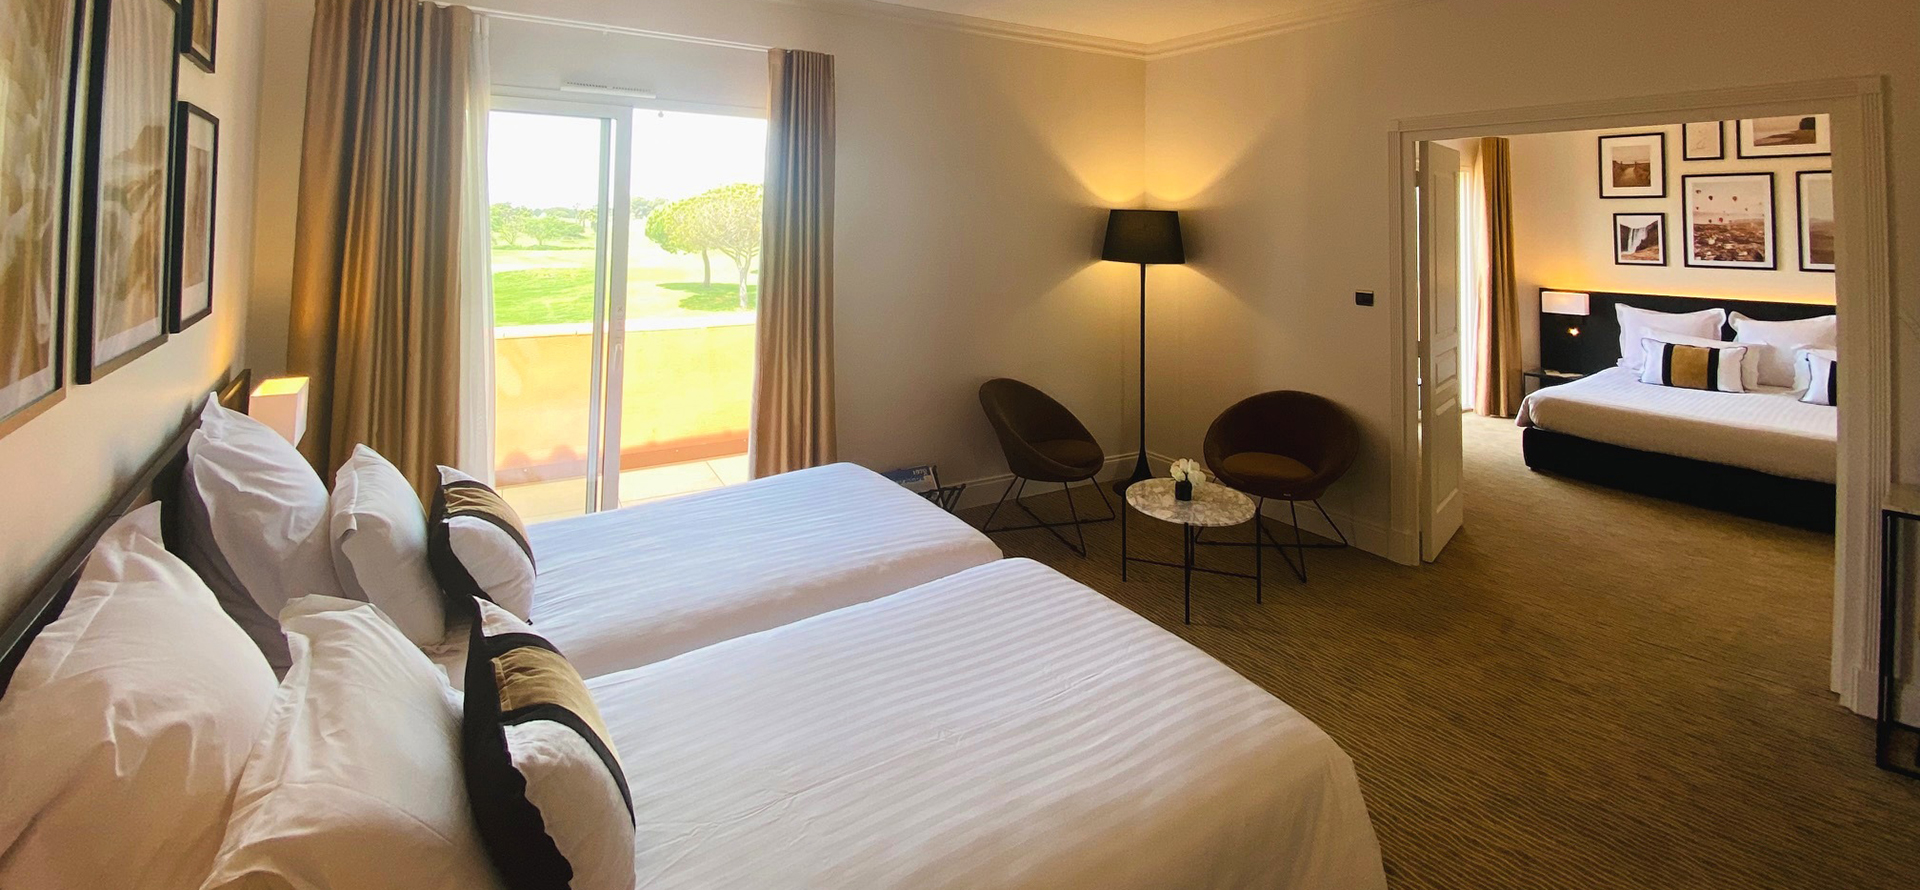 View of a suite with 1 double bed at the Palmyra Golf, a hotel with a spa in Occitanie